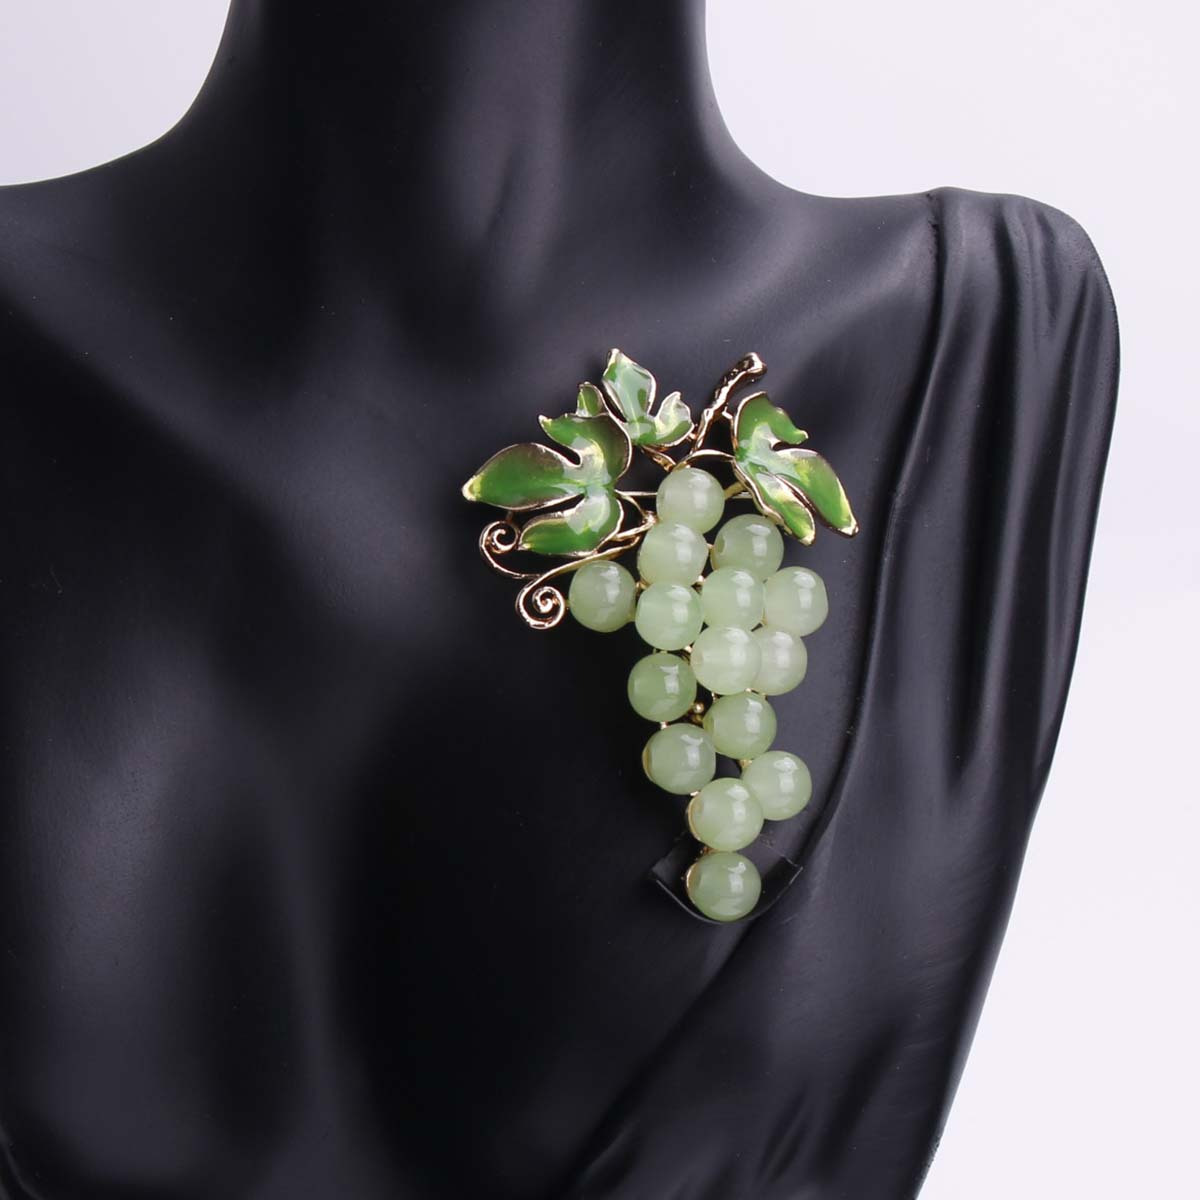 

Bohemian Luxury Glass Grape Brooch Pin - Alloy Enamel Rhinestone Fruit Collar Badge, Chic Plant Corsage Pin For Women, Versatile Decoration For All Seasons, Ideal For Daily Wear & Campus Events